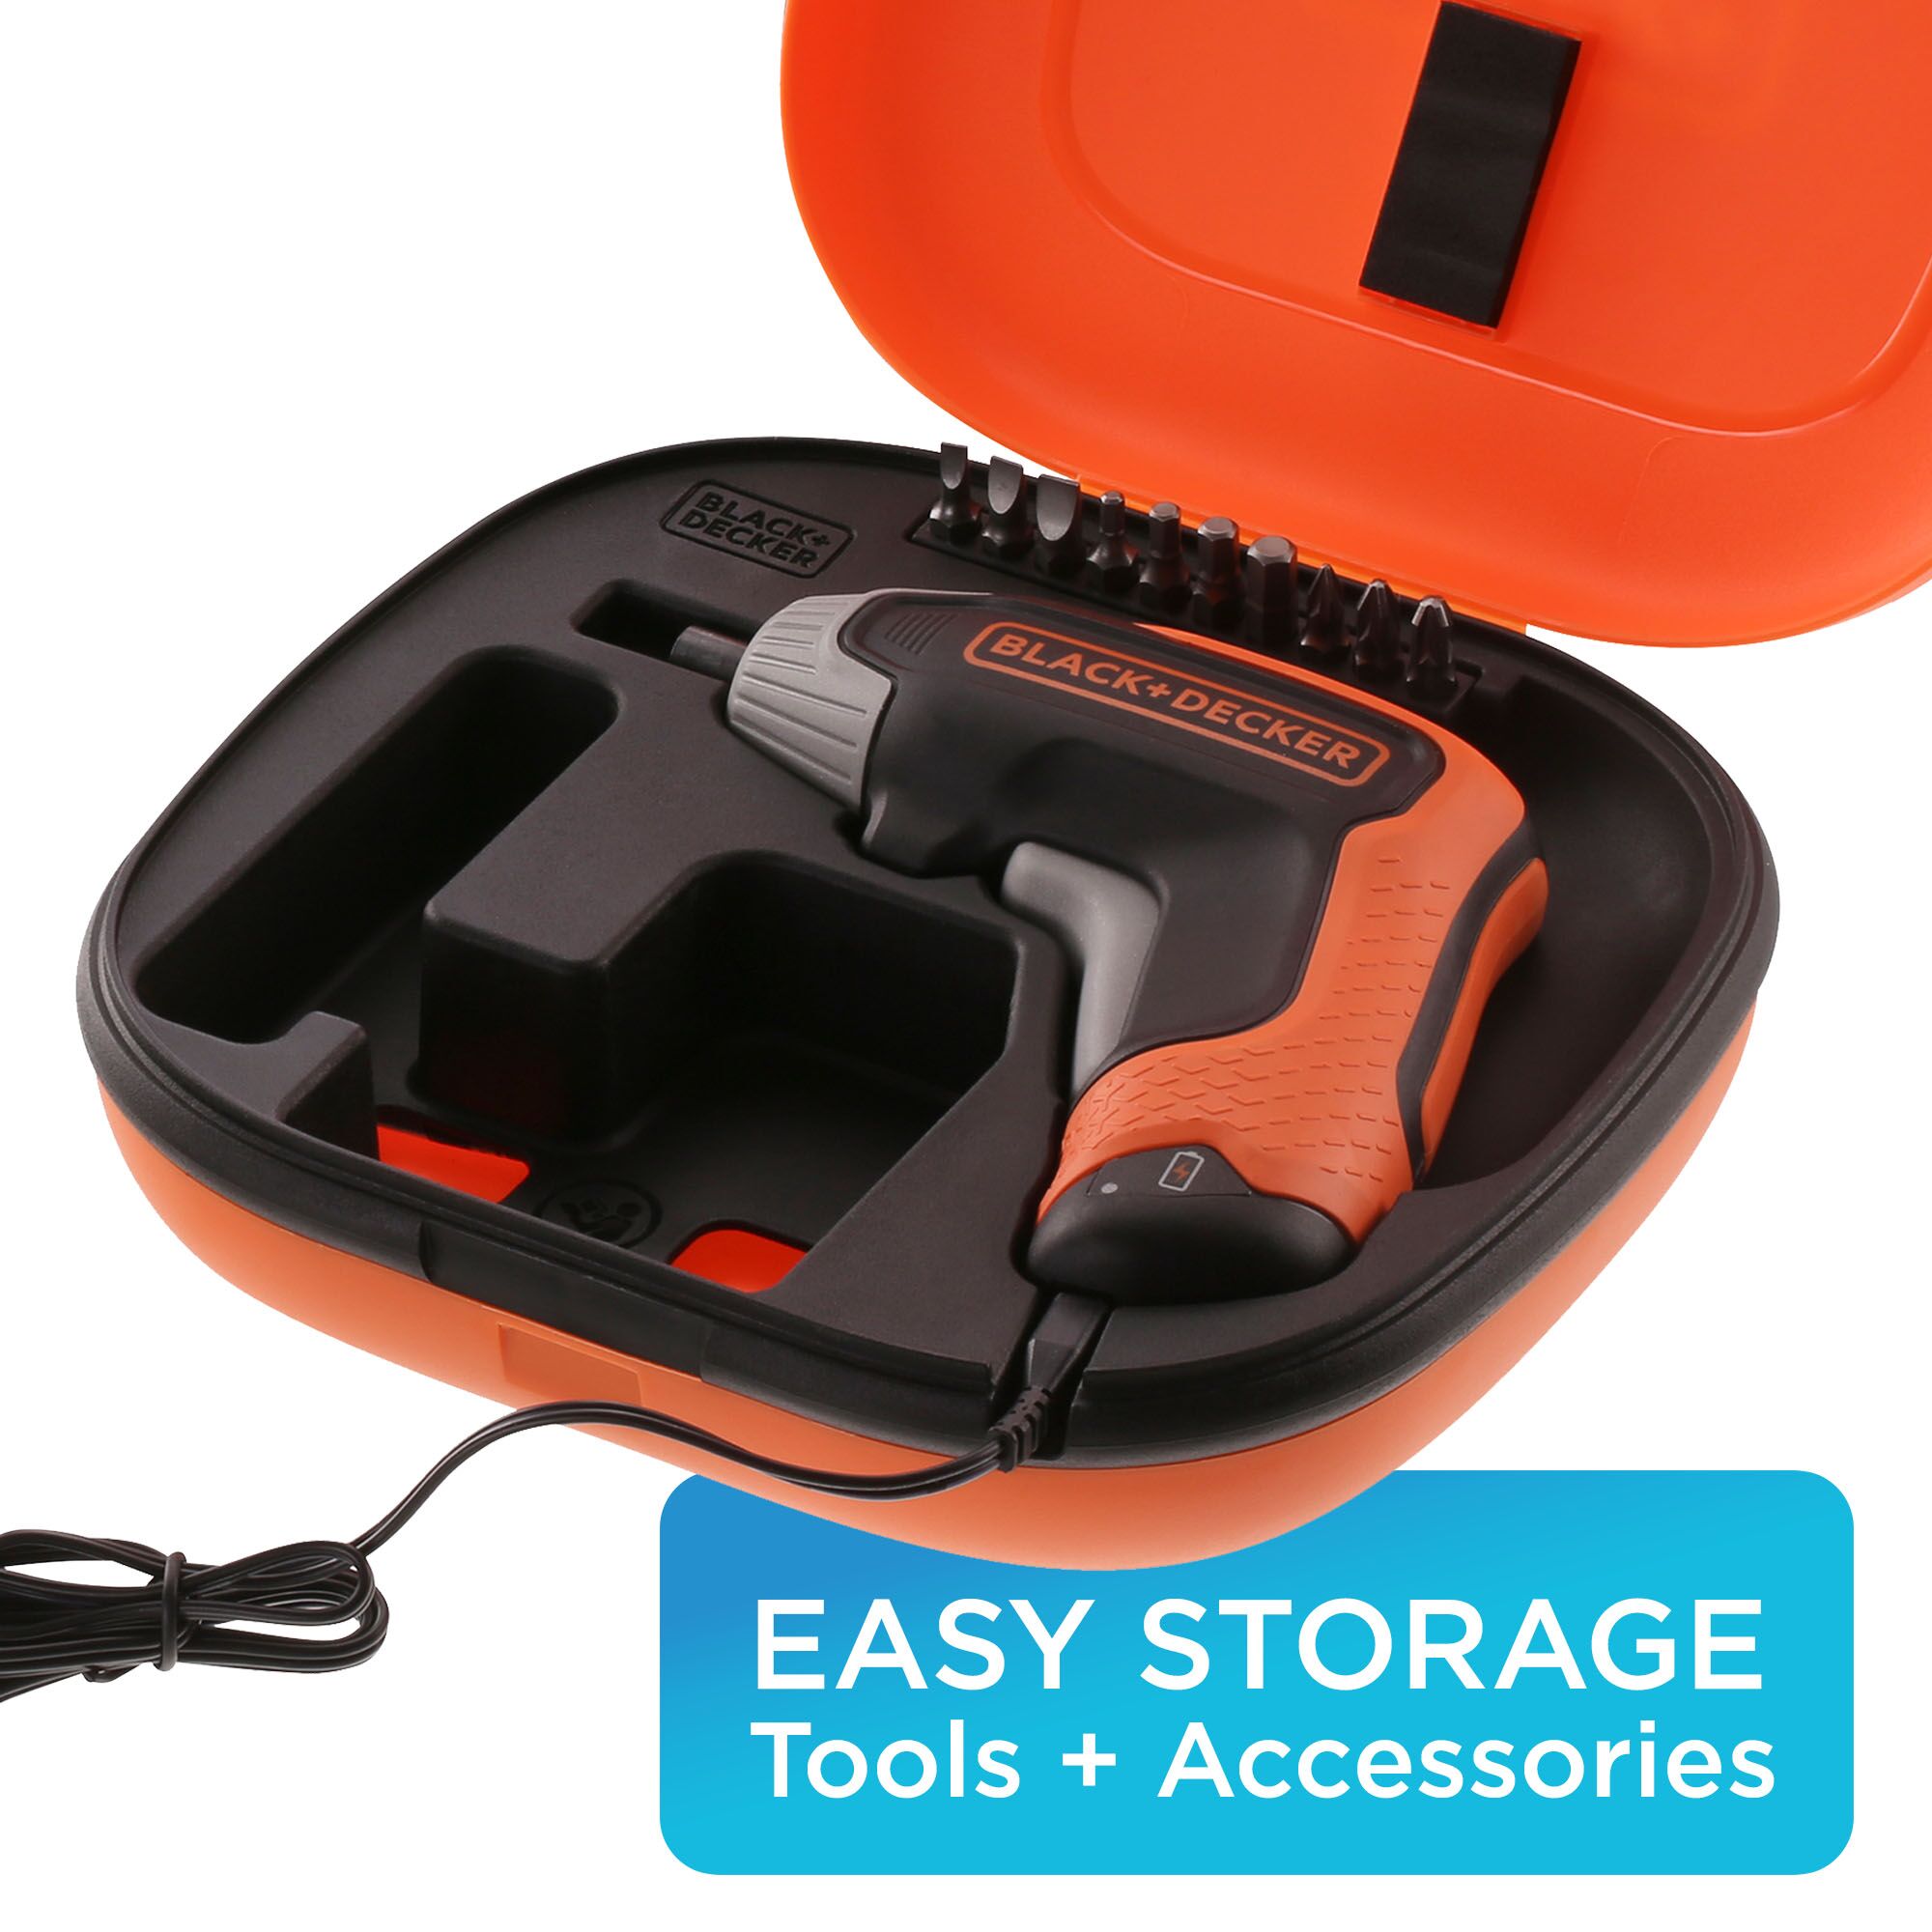 The BLACK+DECKER 4V Max Cordless Screwdriver has easy storage to fit tools and accessories